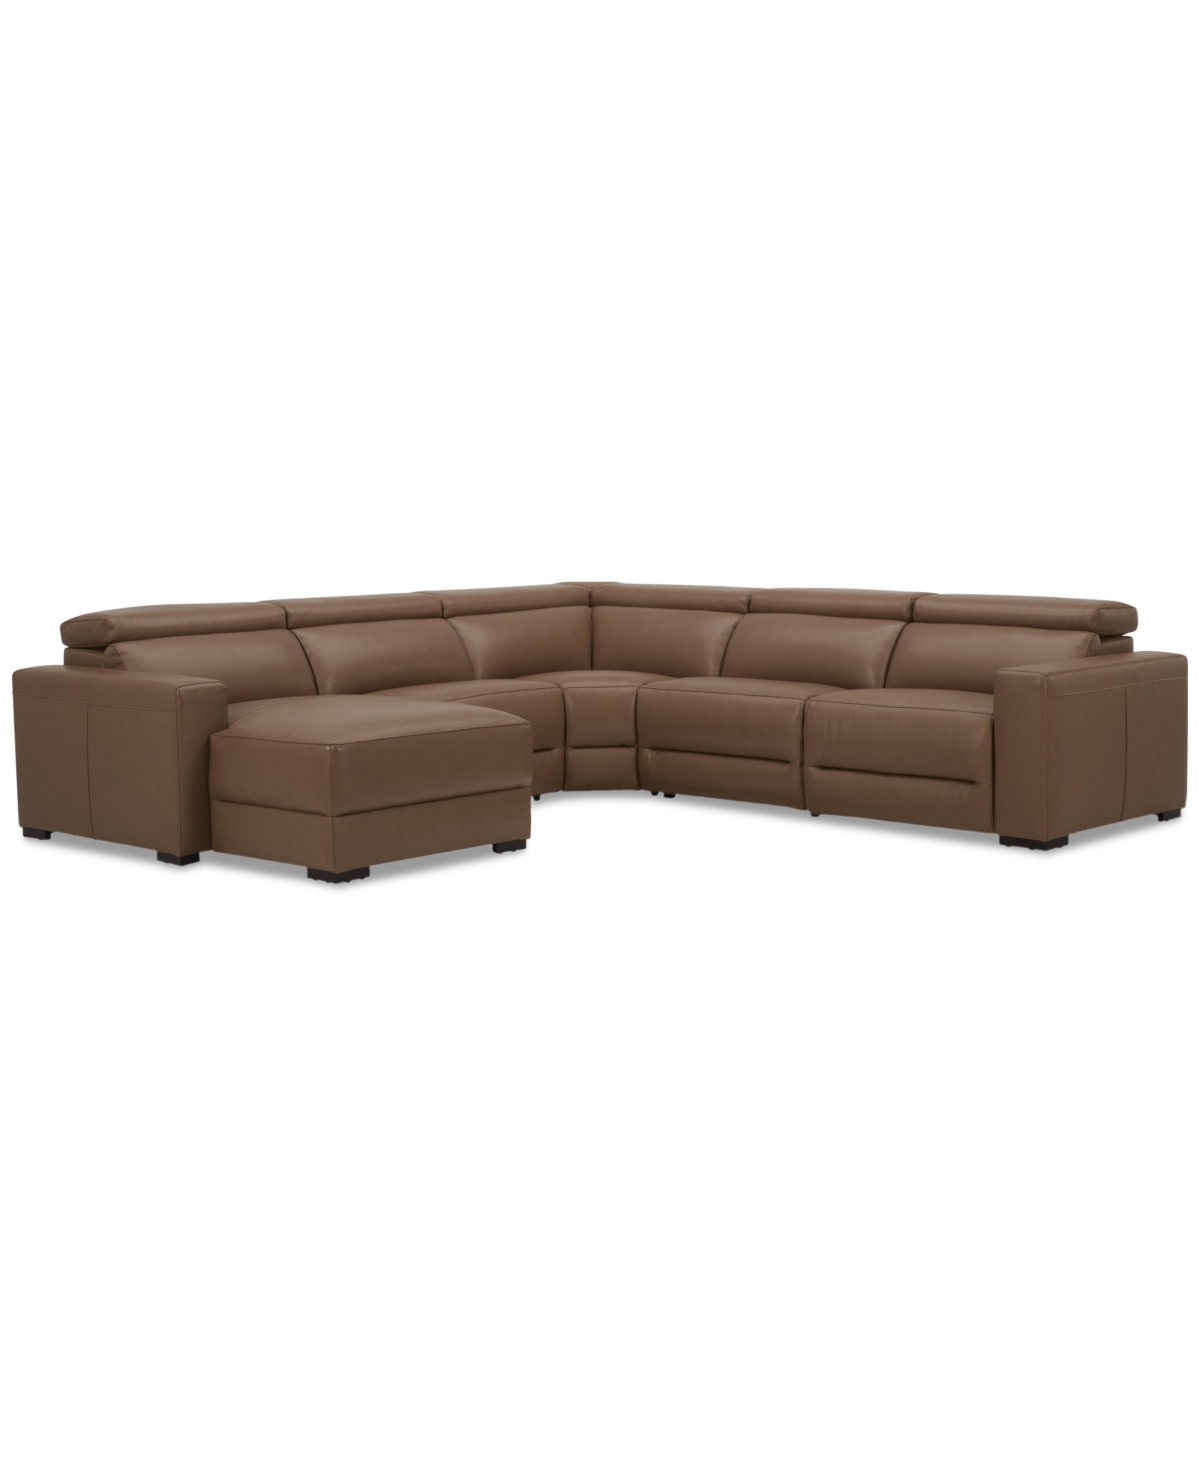 Macy's Nevio 124" 5-pc. Leather Sectional With 1 Power Recliner, Headrests And Chaise, Created For  In Butternut